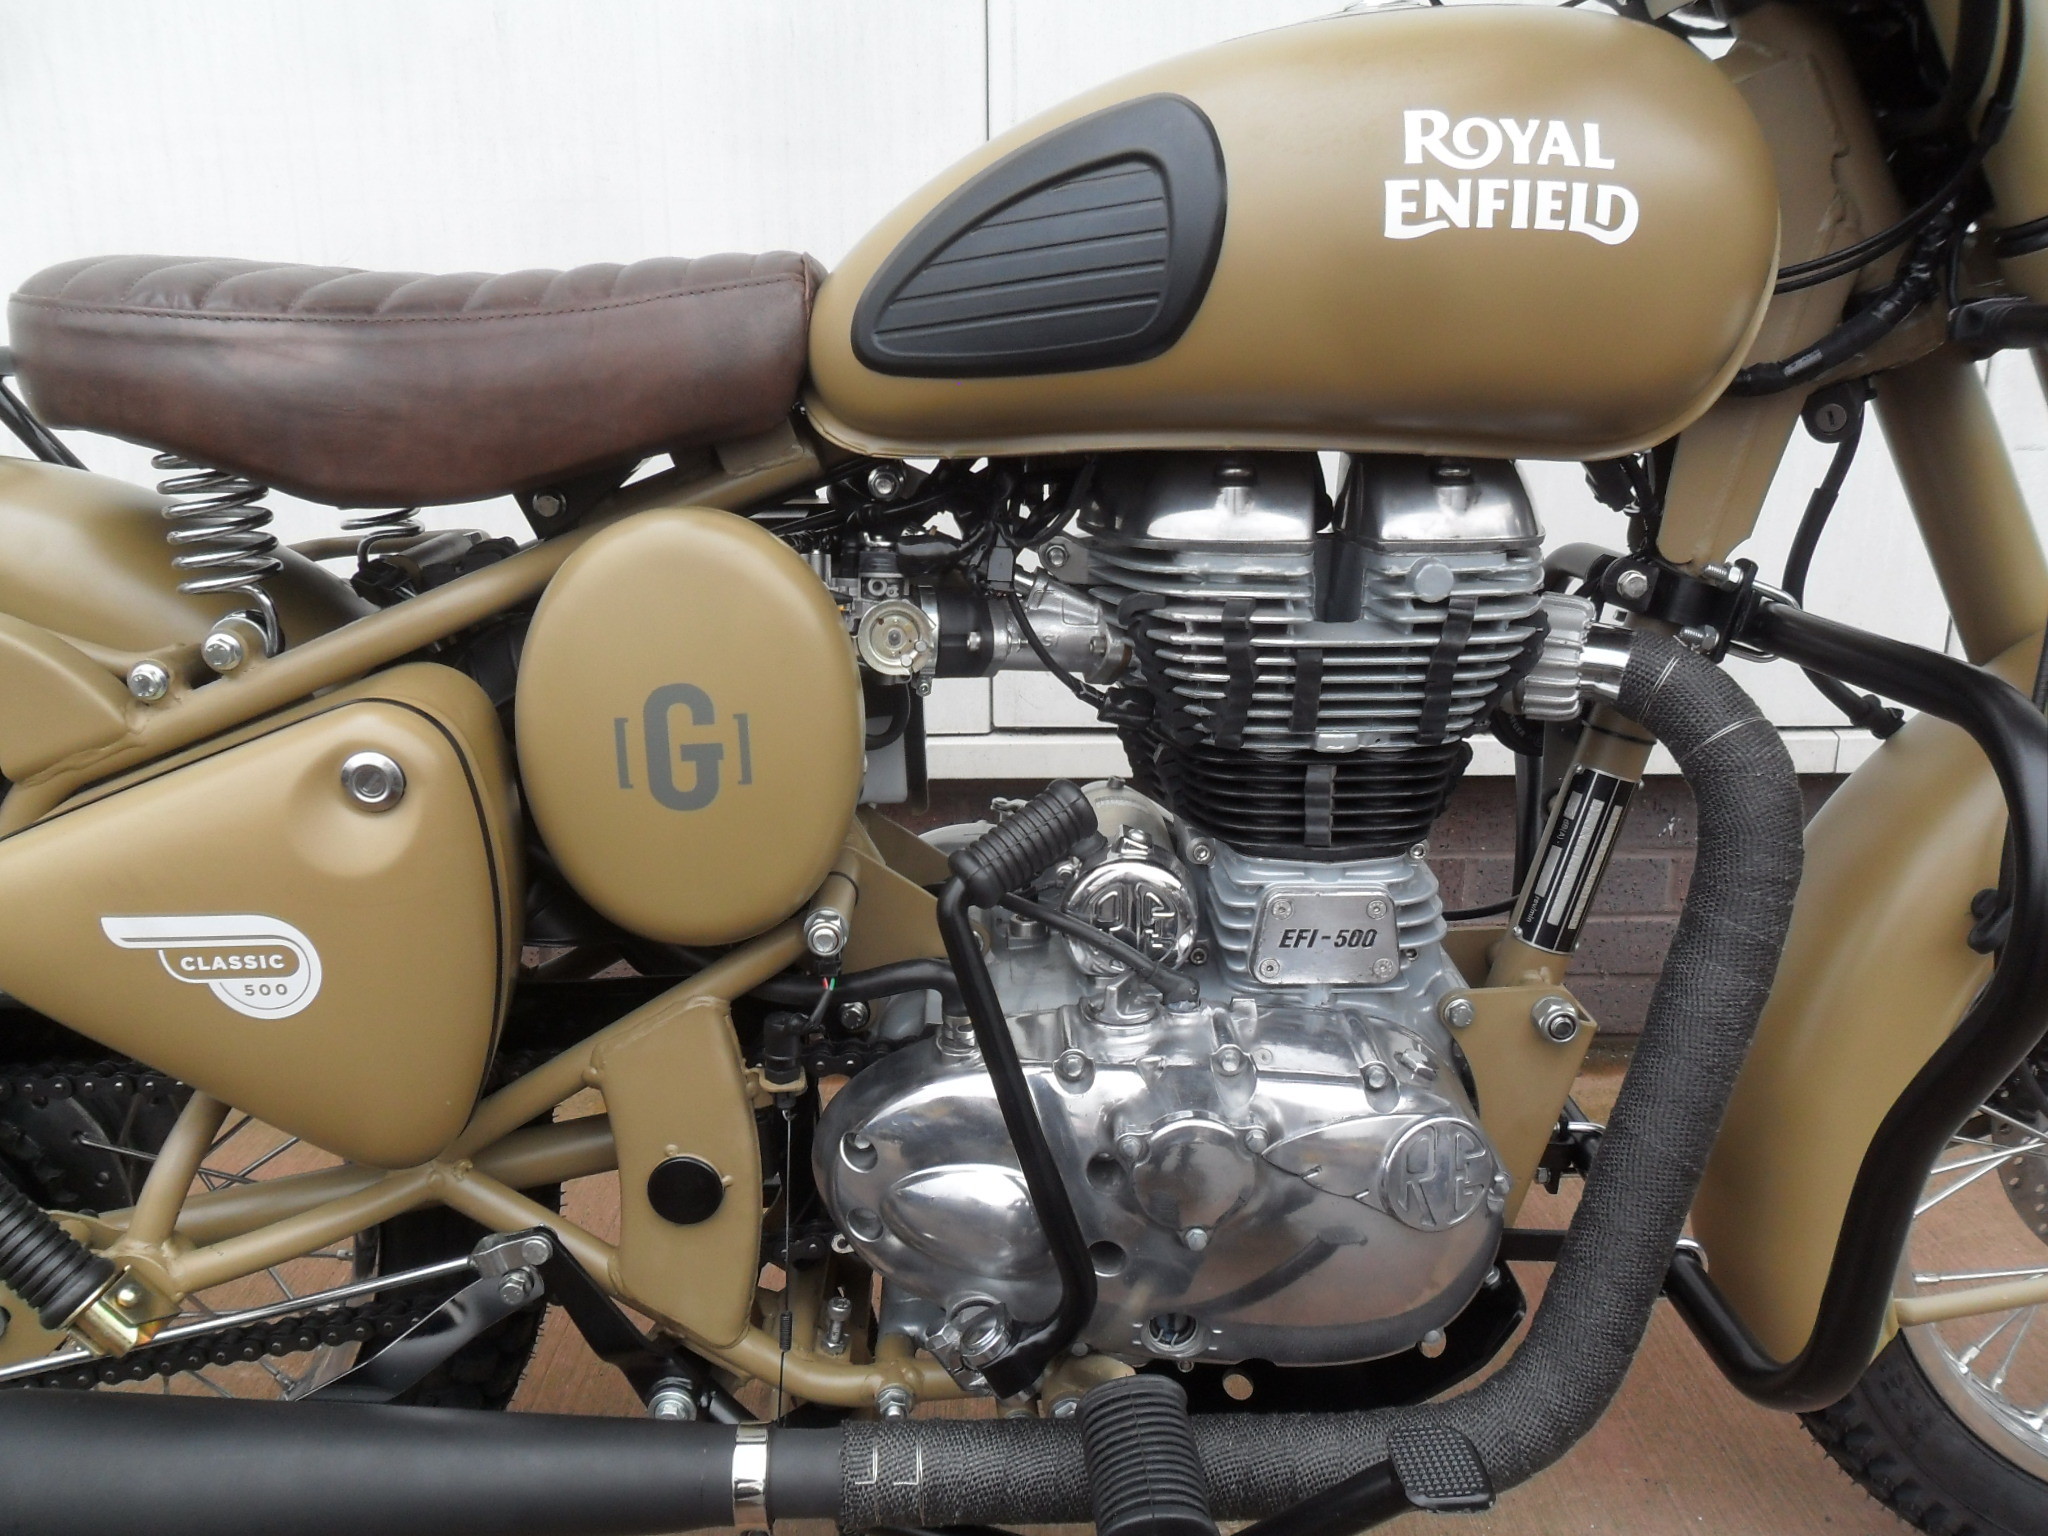 Royal Enfield Continental Gt Hd Wallpapers - Royal Enfield Classic 500 Chrome , HD Wallpaper & Backgrounds